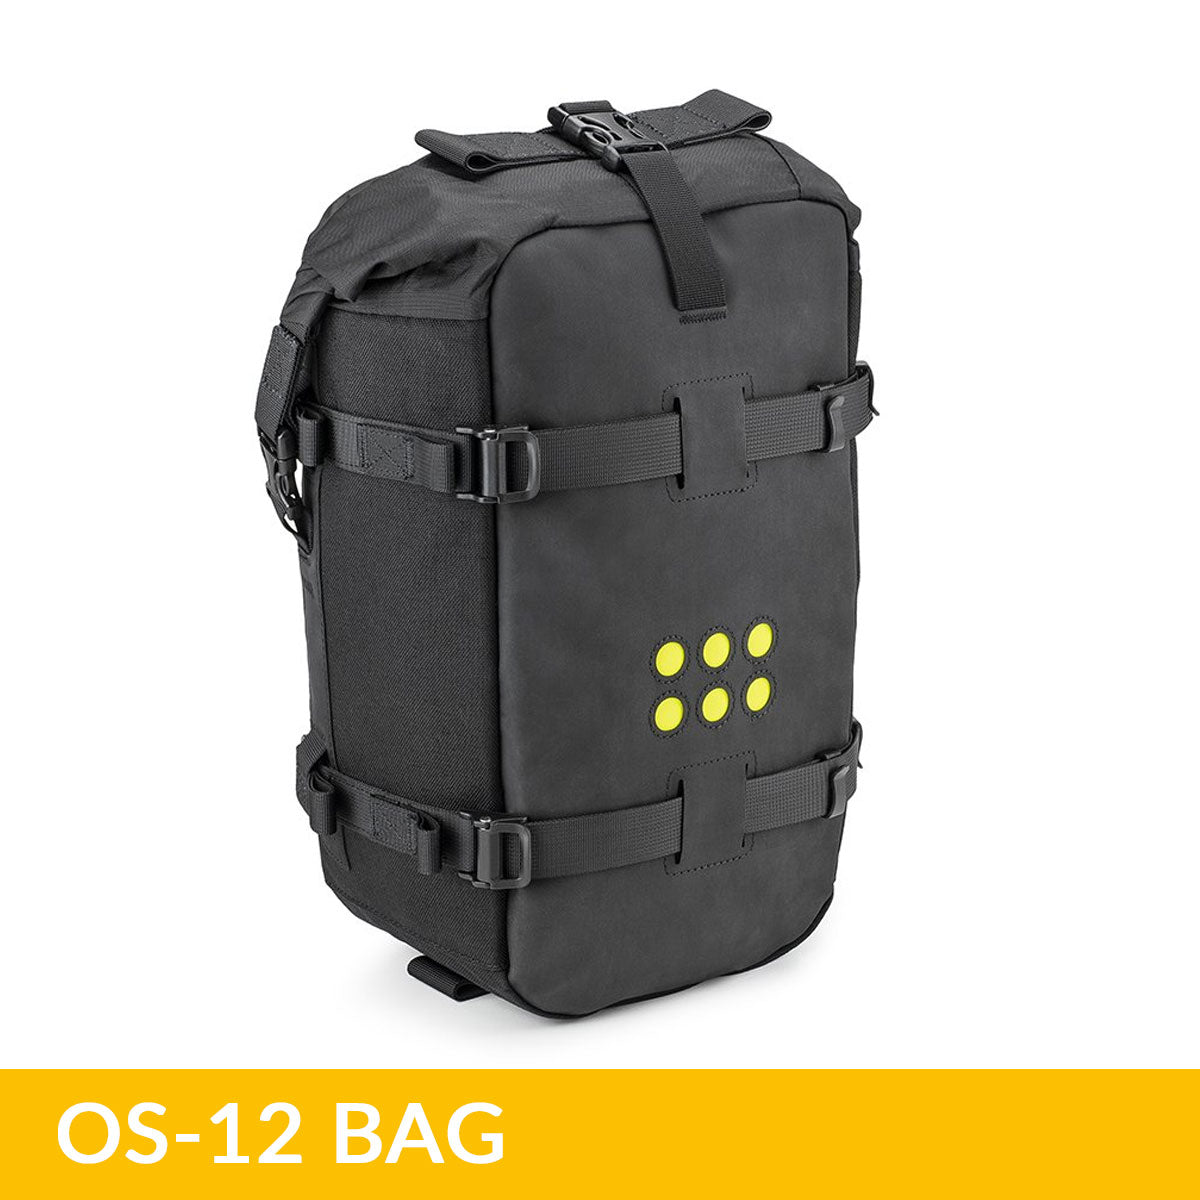 Kriega Overlander-S OS Packs: Serious luggage for serious adventures 12L Front